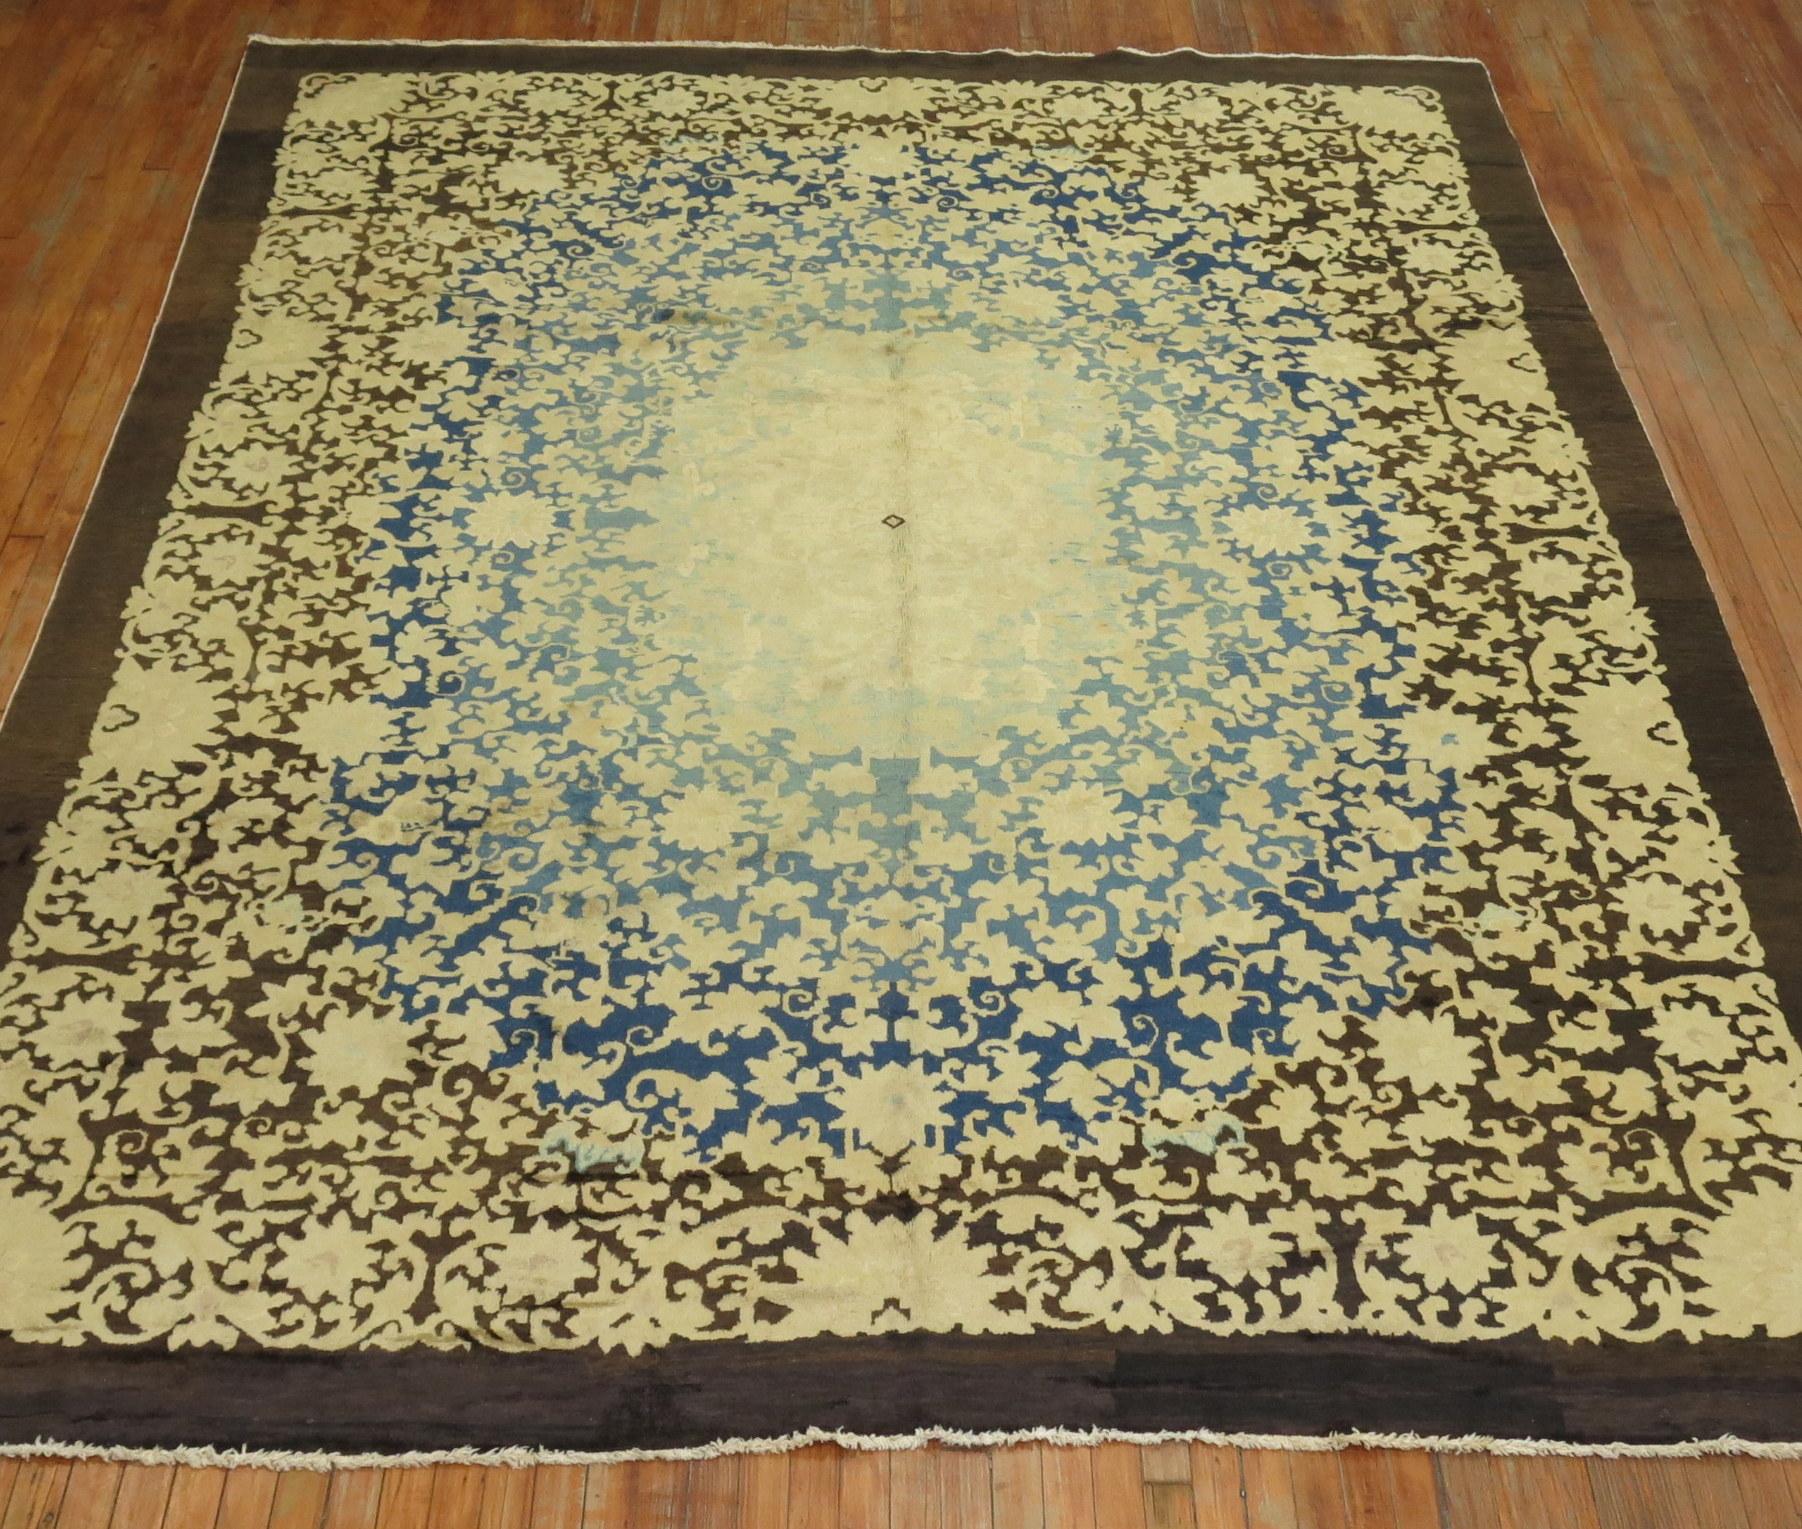 an early 20th Century Chinese rug with a floral design in cream, blue, yellow and brown

Measures: 8'11'' x 11'5''.